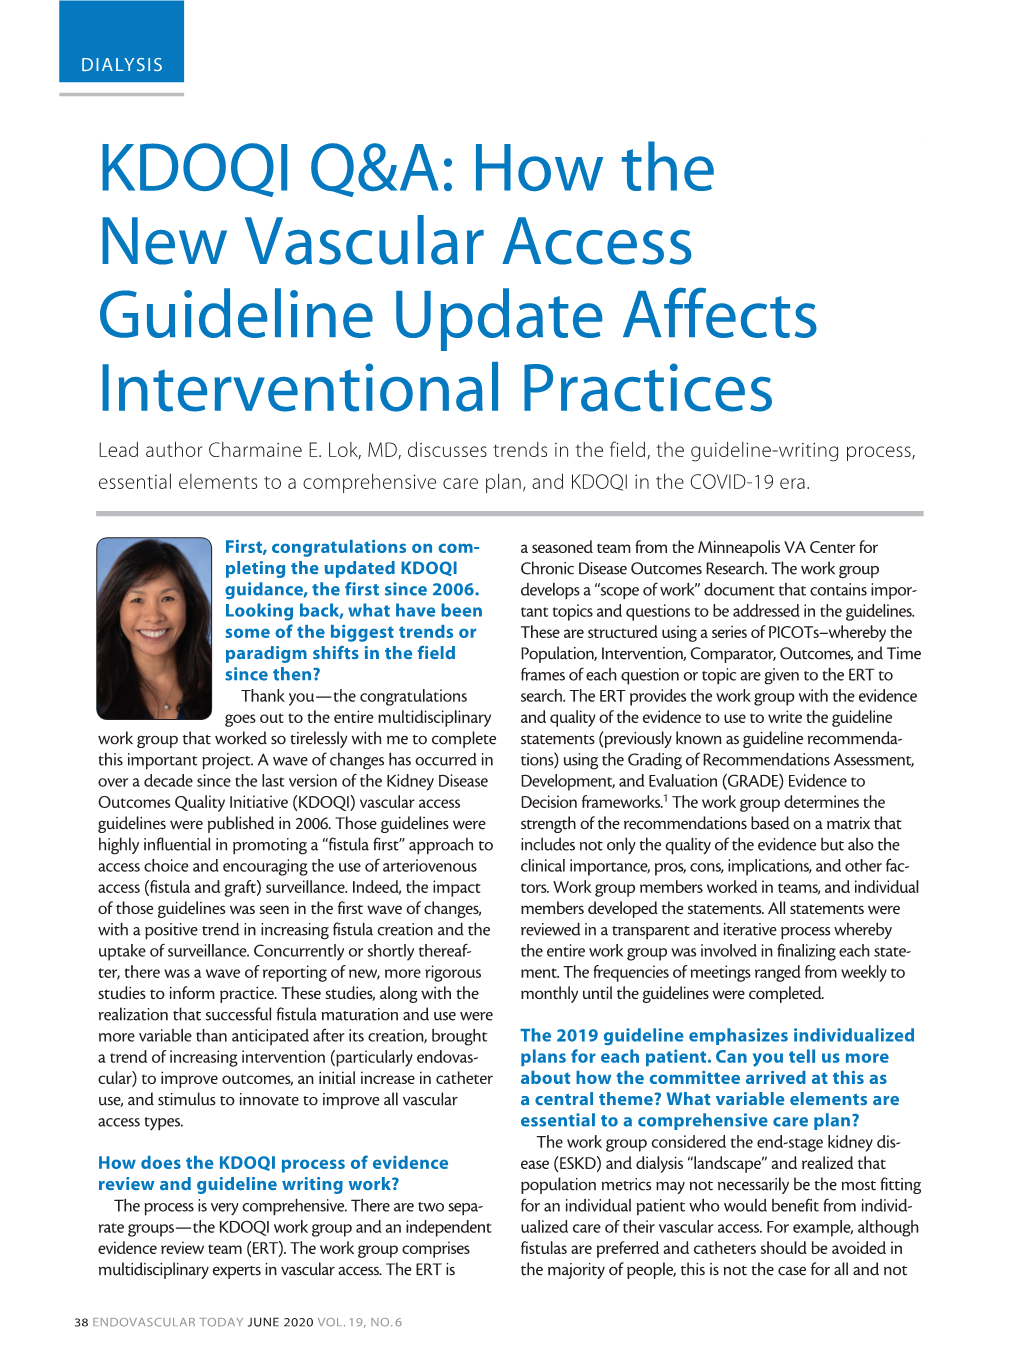 KDOQI Q&A: How the New Vascular Access Guideline Update Affects